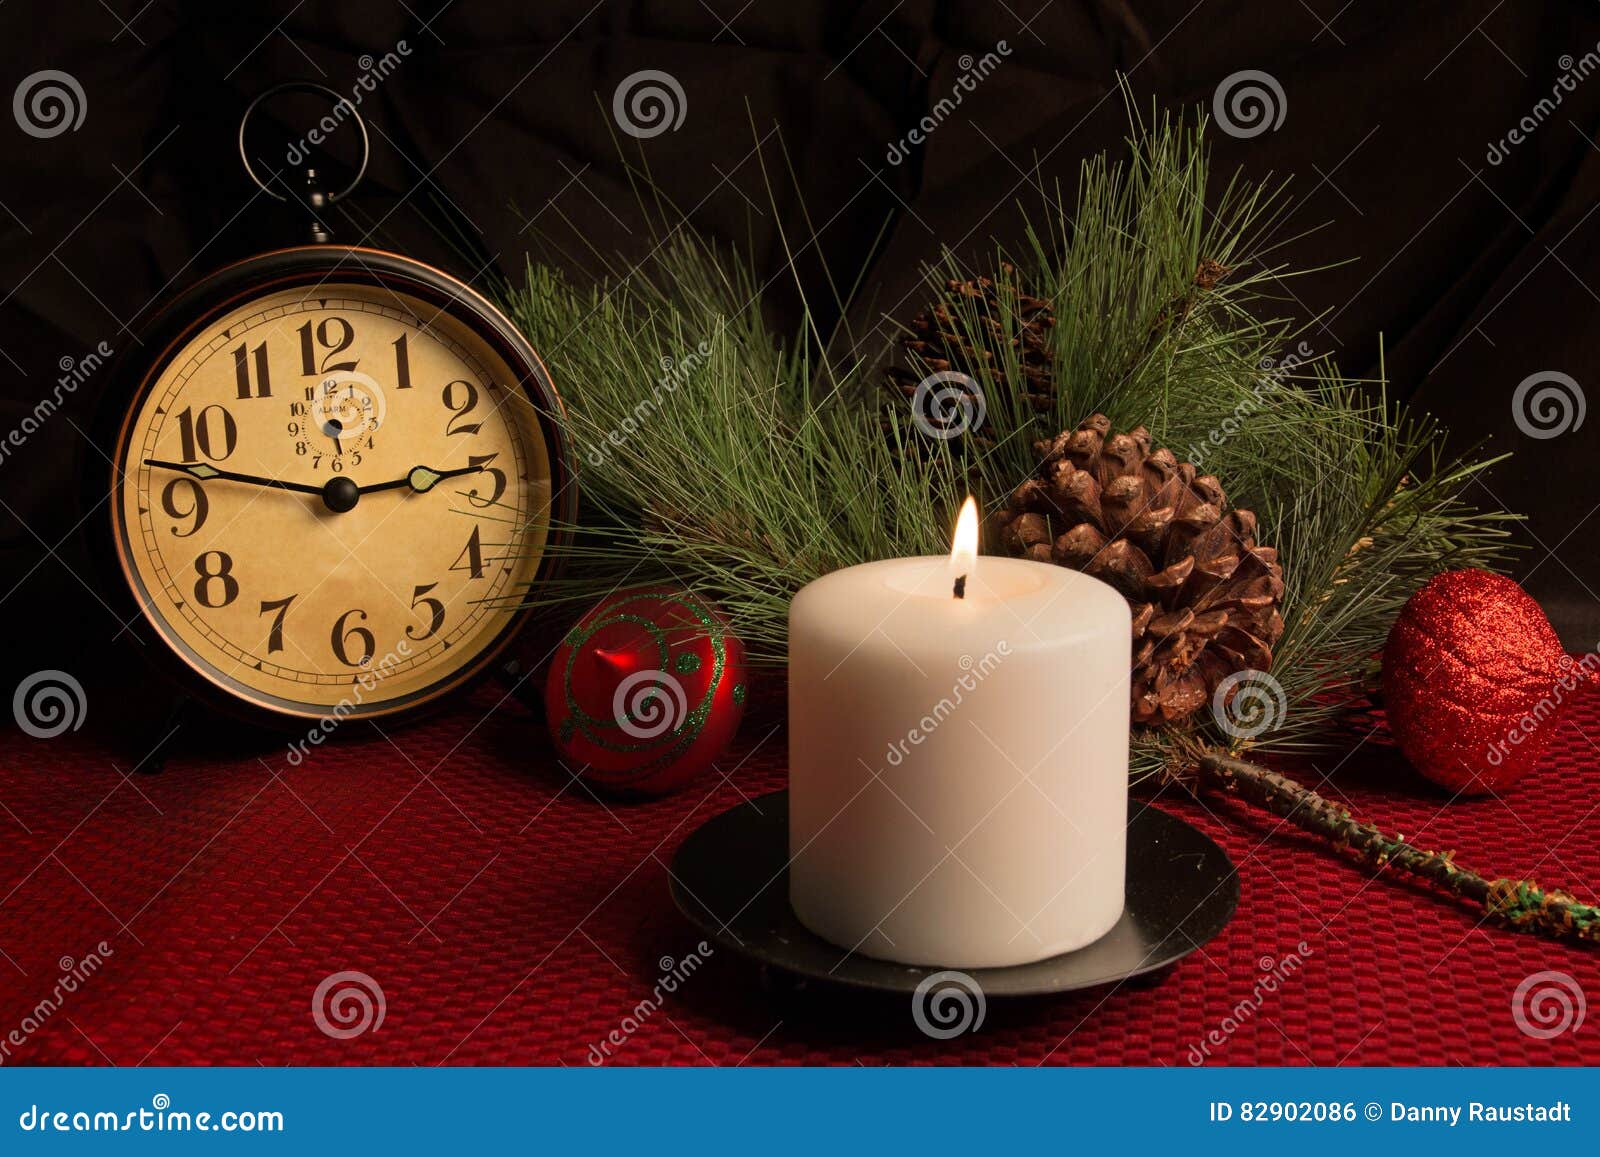 Merry Christmas Holiday Still Life Stock Photo - Image of give, christ ...